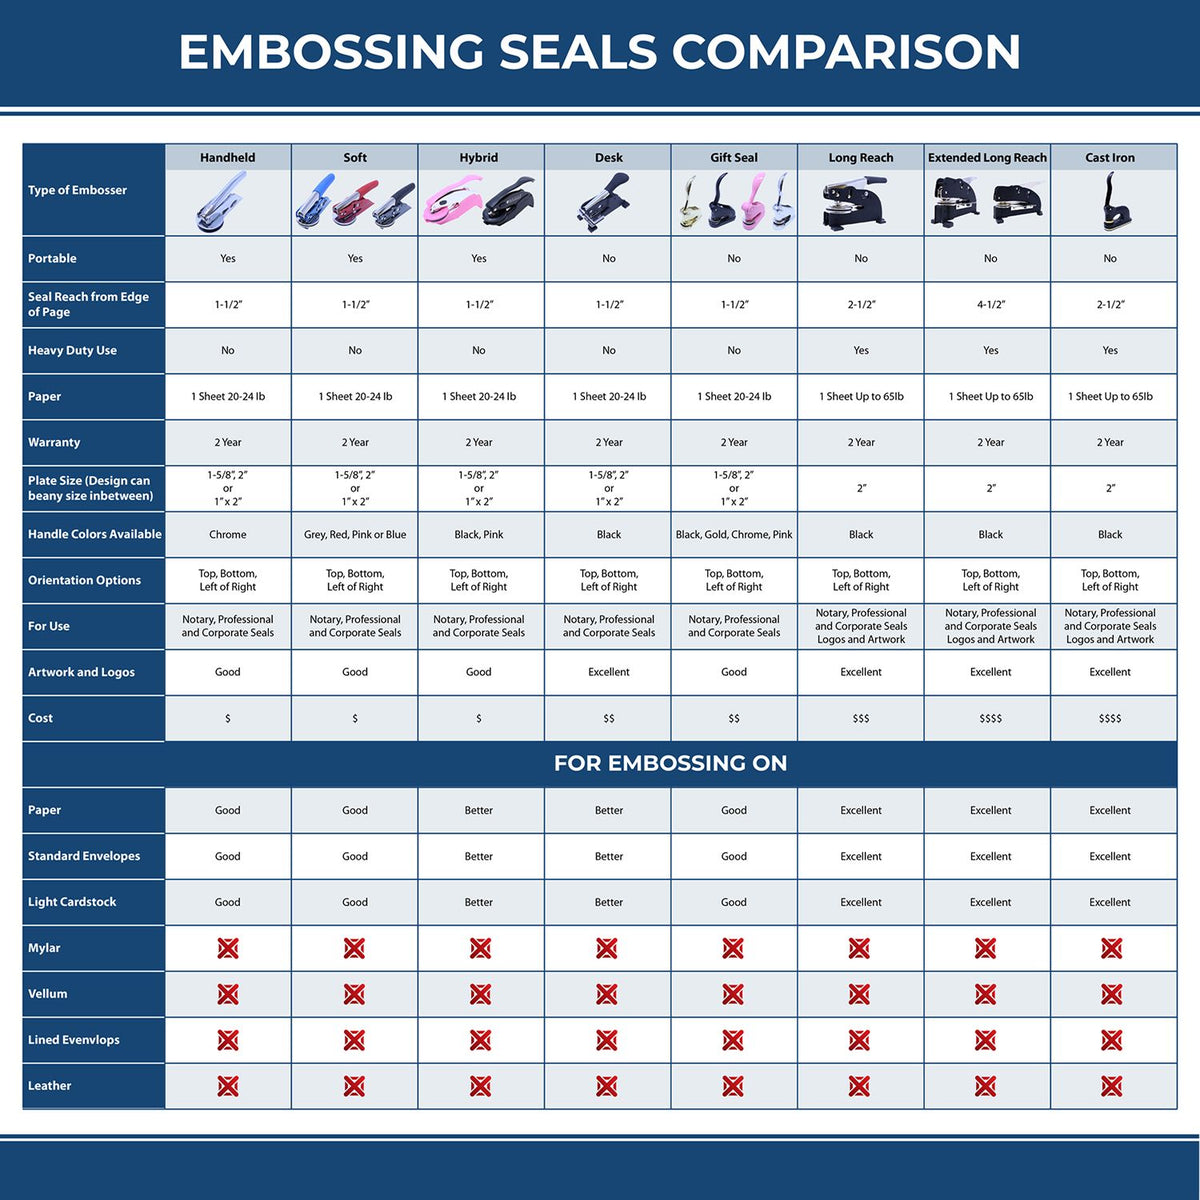 A comparison chart for the different types of mount models available for the Hybrid New Jersey Engineer Seal